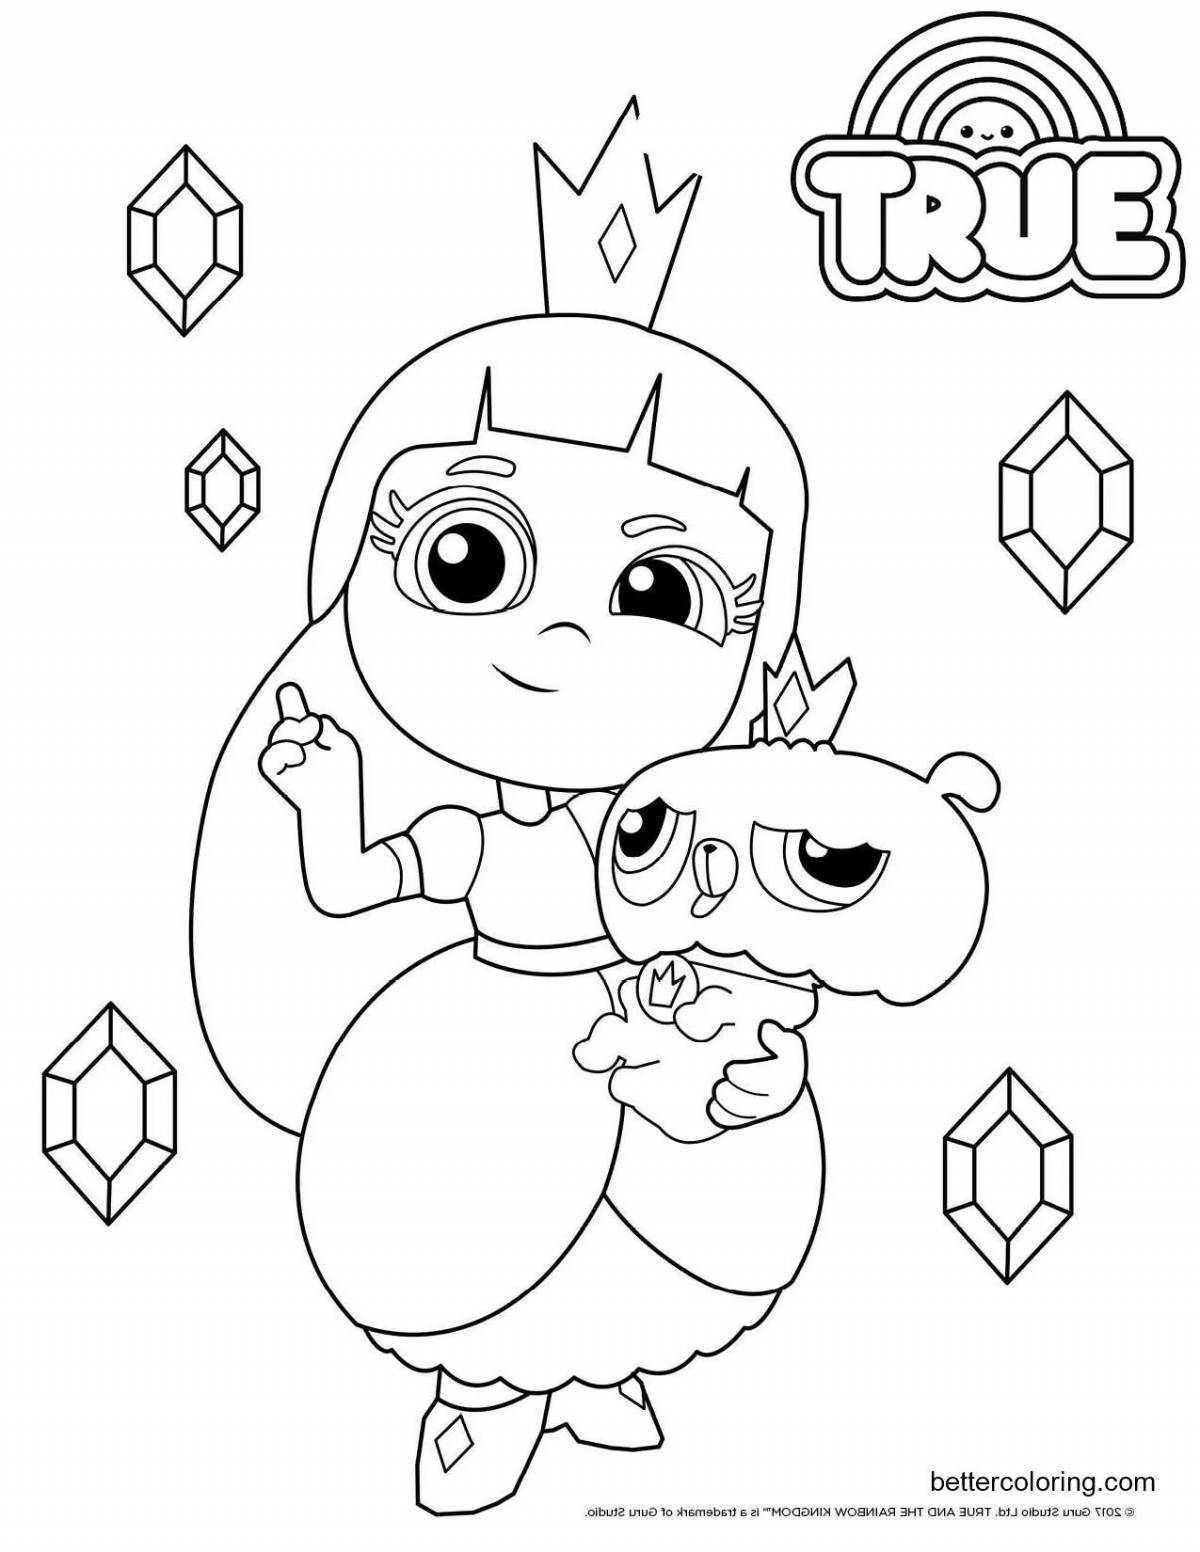 True and bartleby awesome coloring book